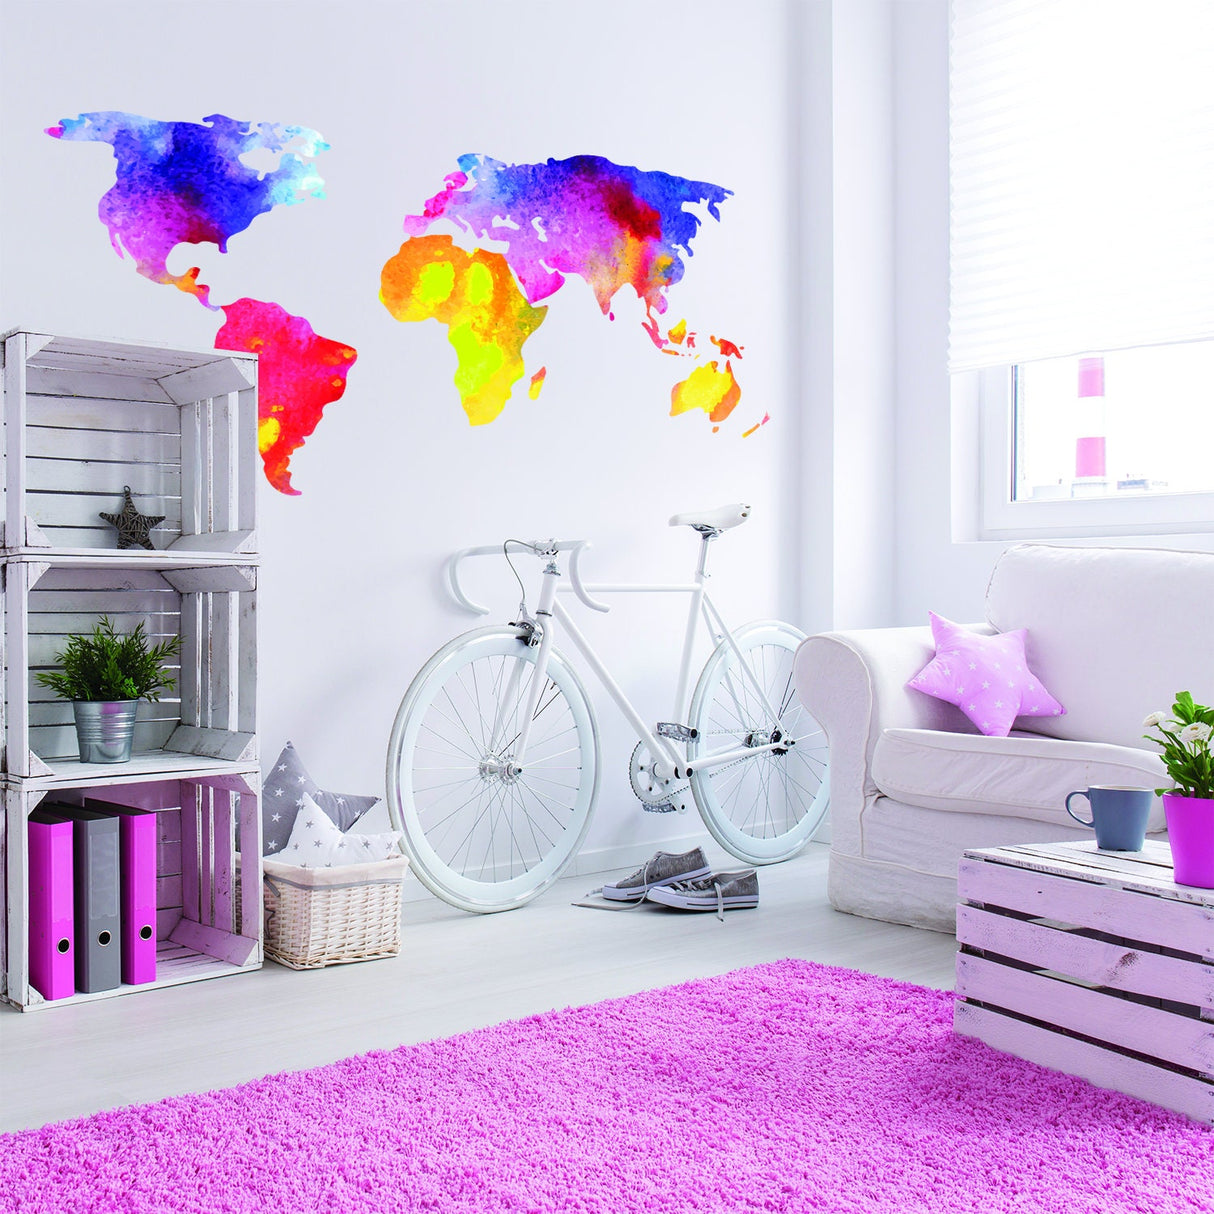 World Map Wall Decal - Sticker For Bedroom Playroom Boys Room Mural Decor